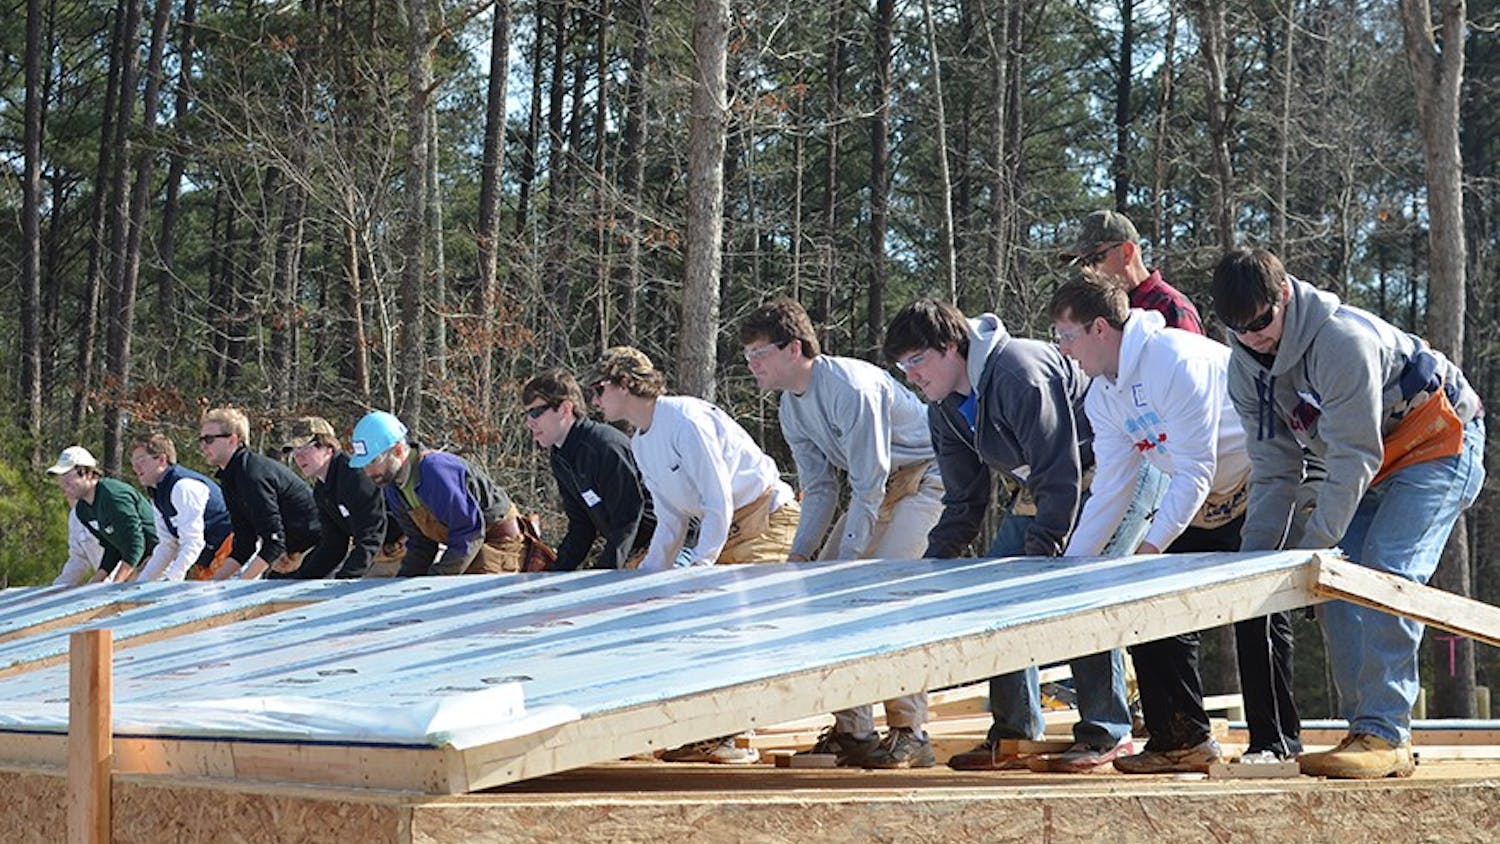 Brothers for David, a partnership of several UNC fraternities, work together with Habitat for Humanity to build a house in honor of David Shannon. The house will home a lower-income CH family whose parents work as custodians on UNC’s campus.